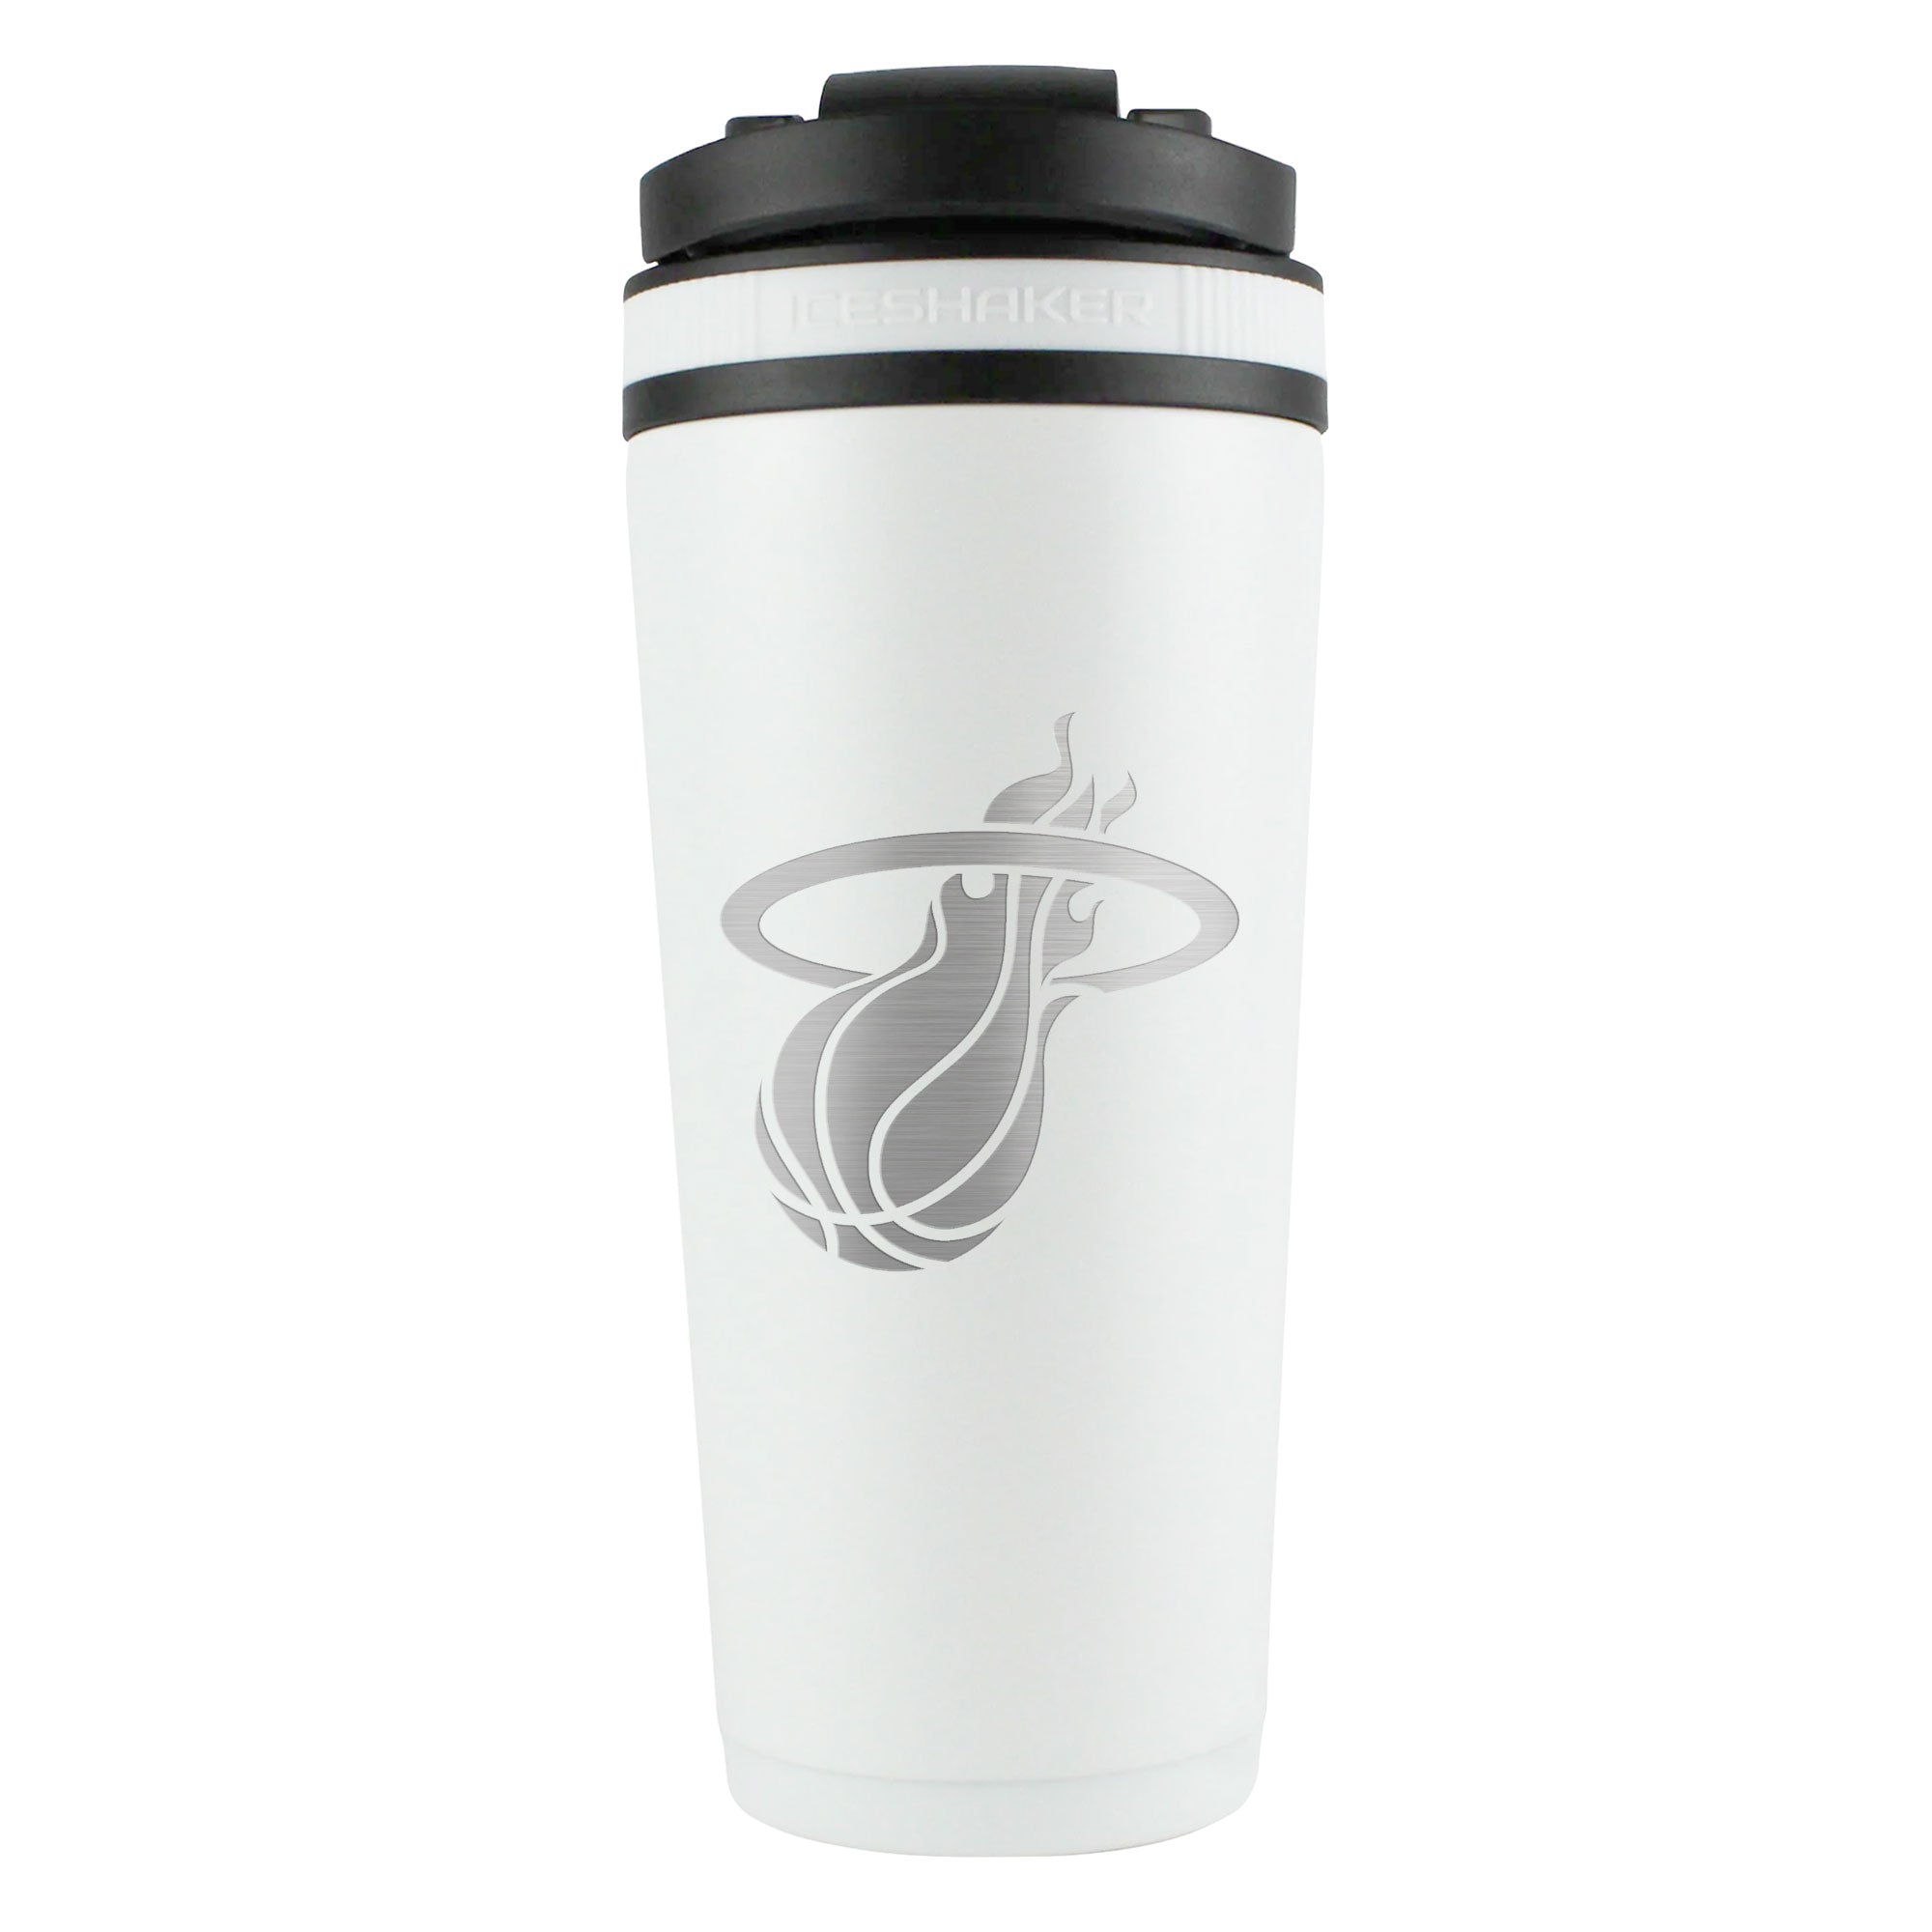 Officially Licensed Miami Heat 26oz Ice Shaker - White